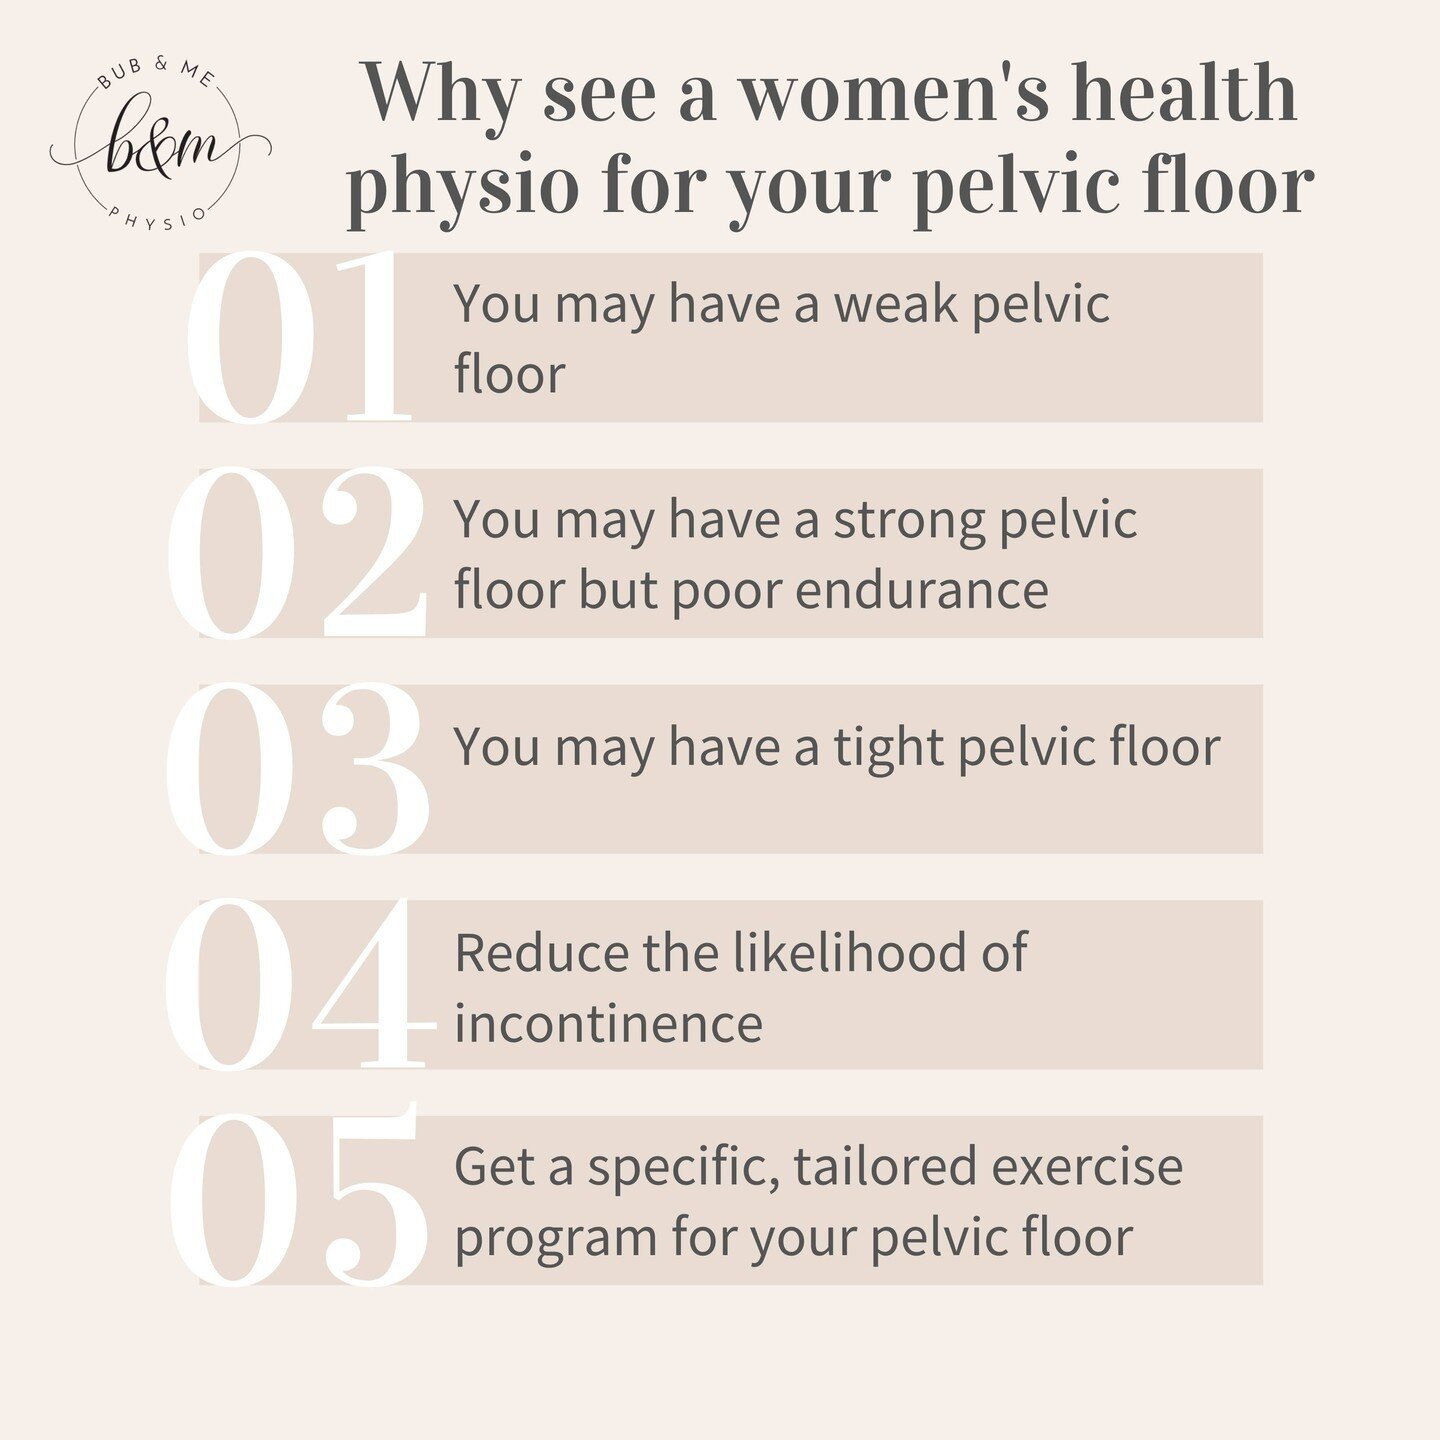 The strength, endurance and functionality of each person's pelvic floor is different and it is for this reason that we highly recommend an assessment by a pelvic floor/women's health physiotherapist who can determine exactly where your pelvic floor i